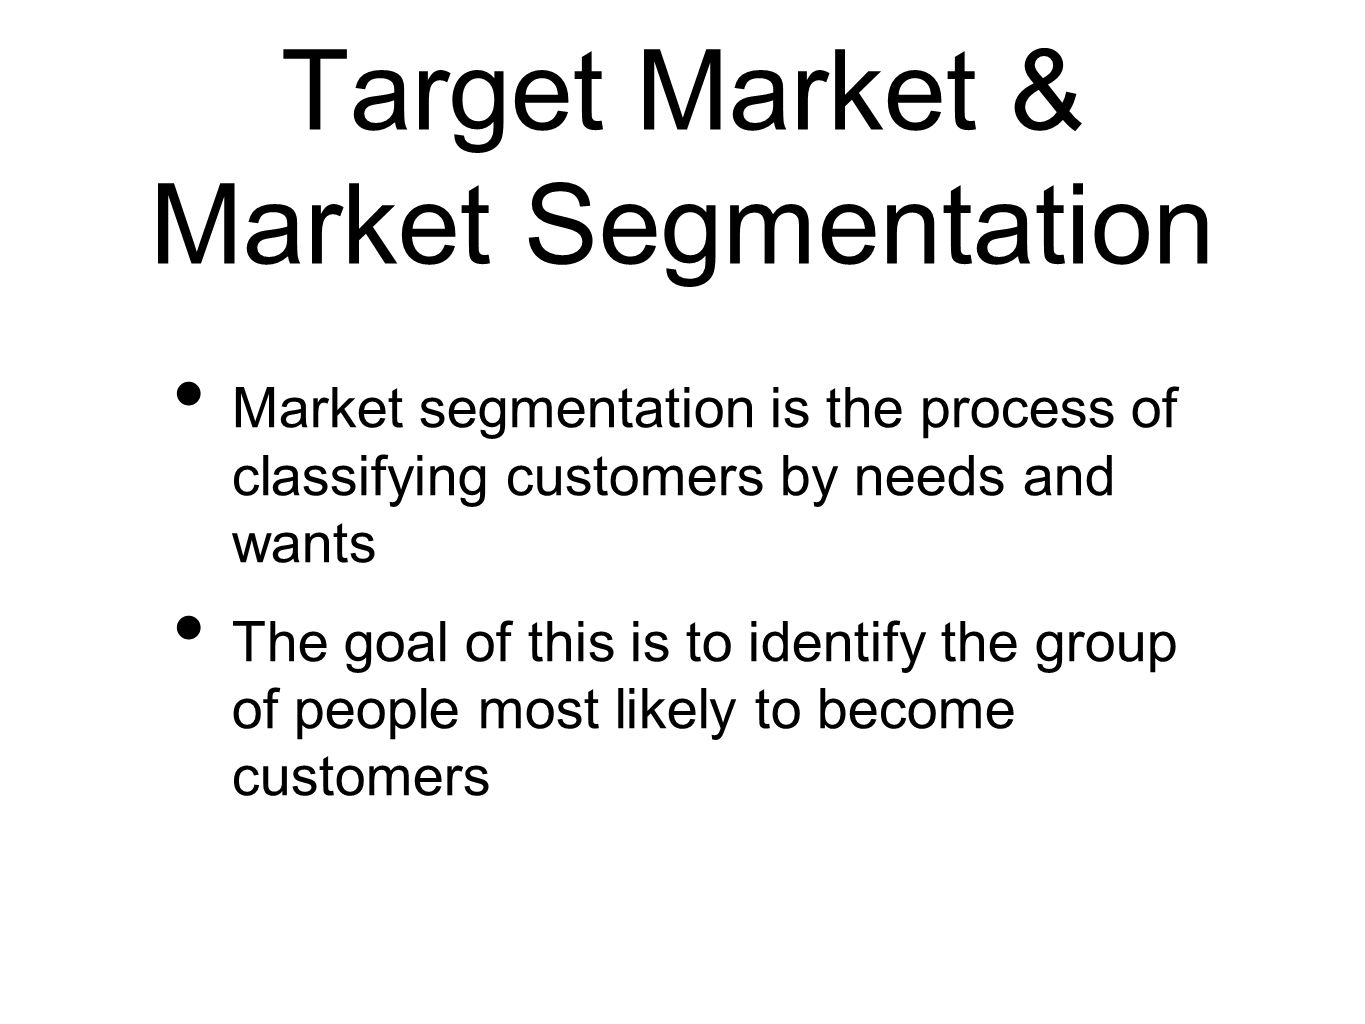 Target Market & Market Segmentation Market segmentation is the process of classifying customers by needs and wants The goal of this is to identify the group of people most likely to become customers